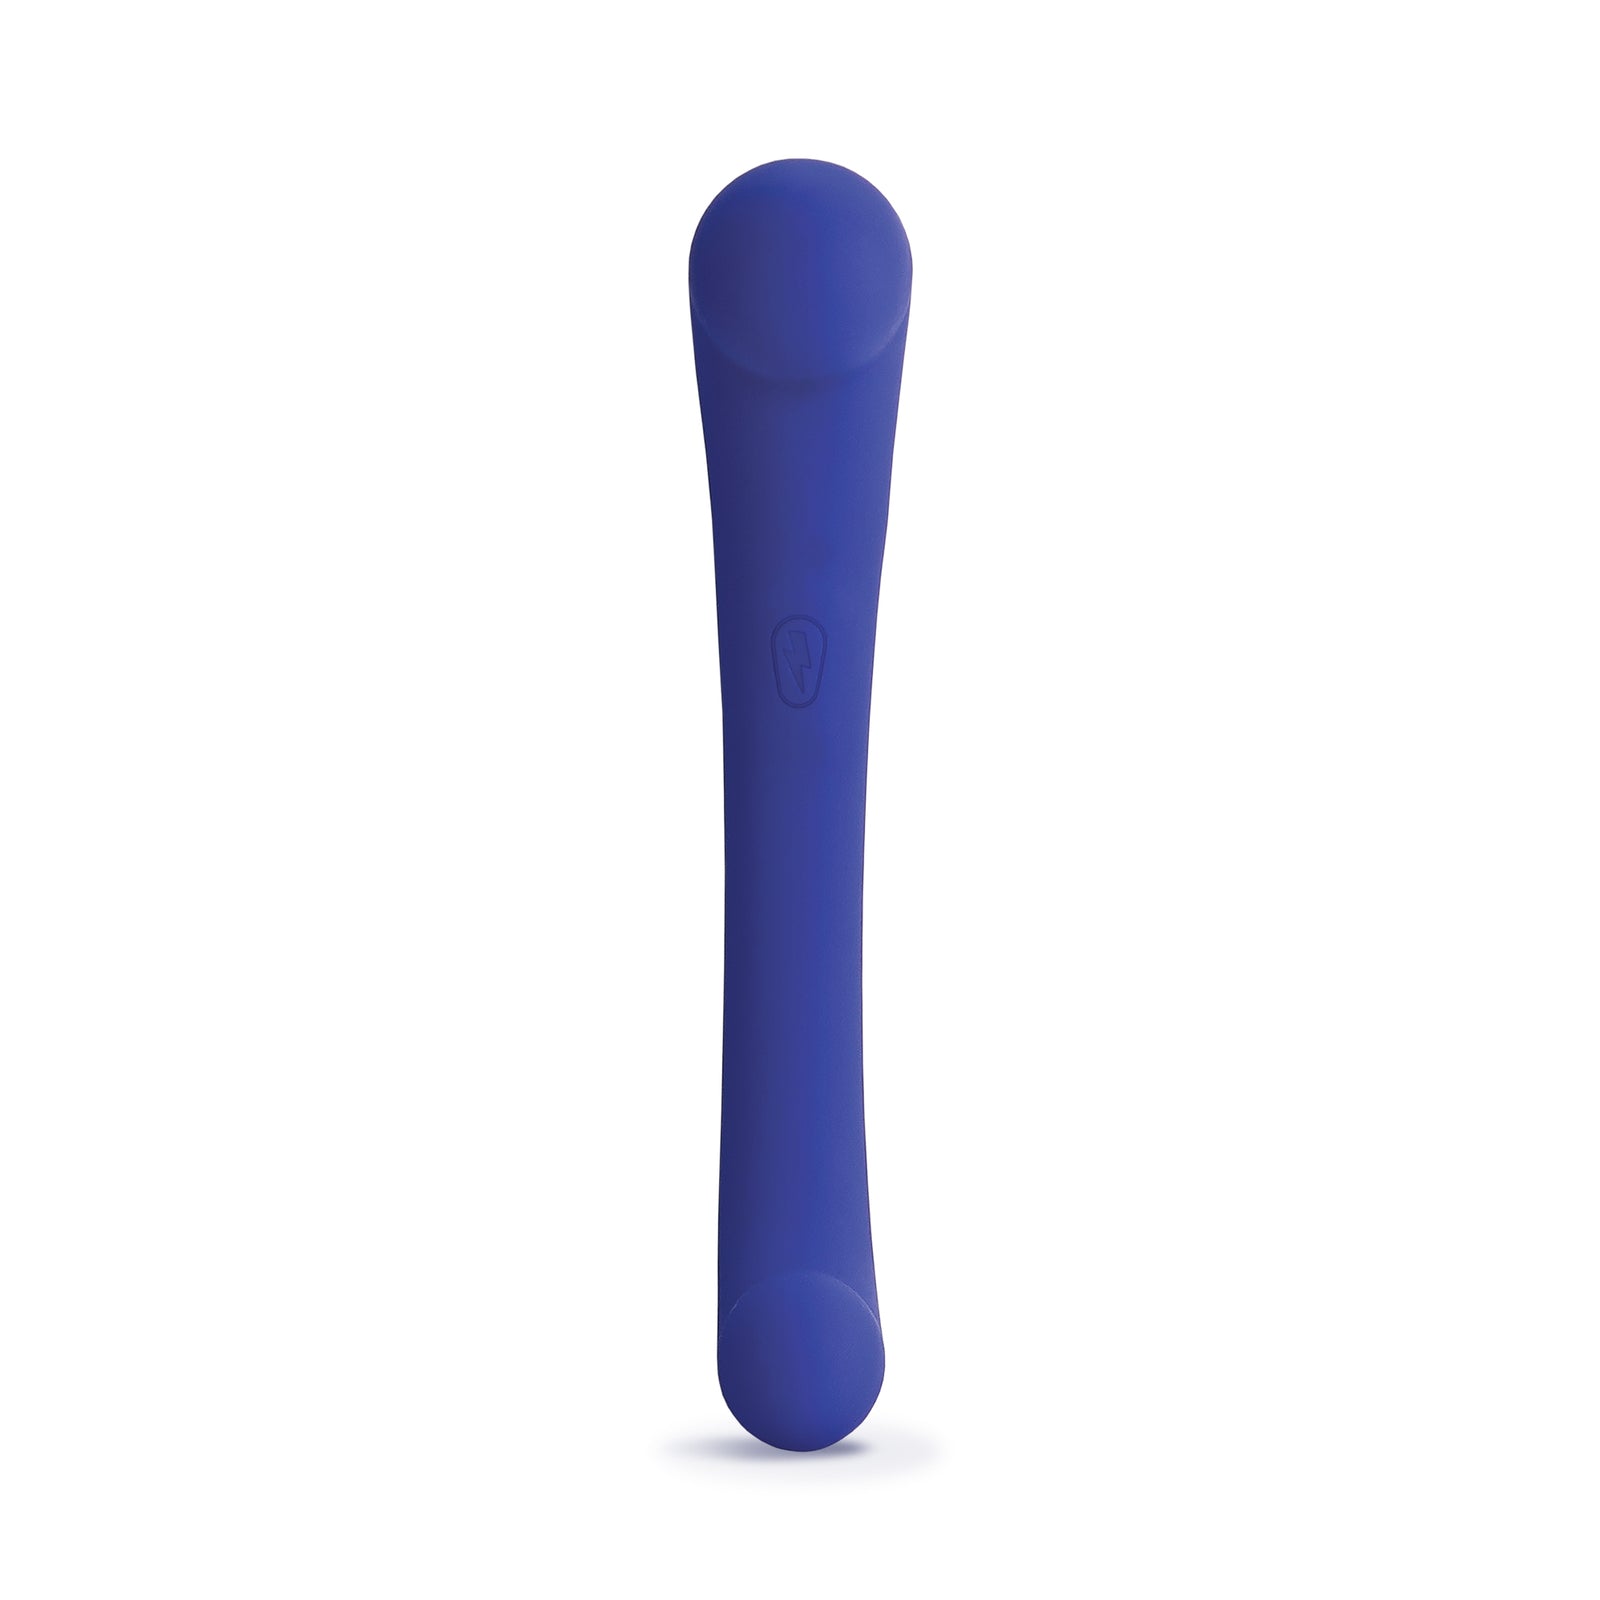 DUAL VIBRATING ARCH WITH STORAGE BAG